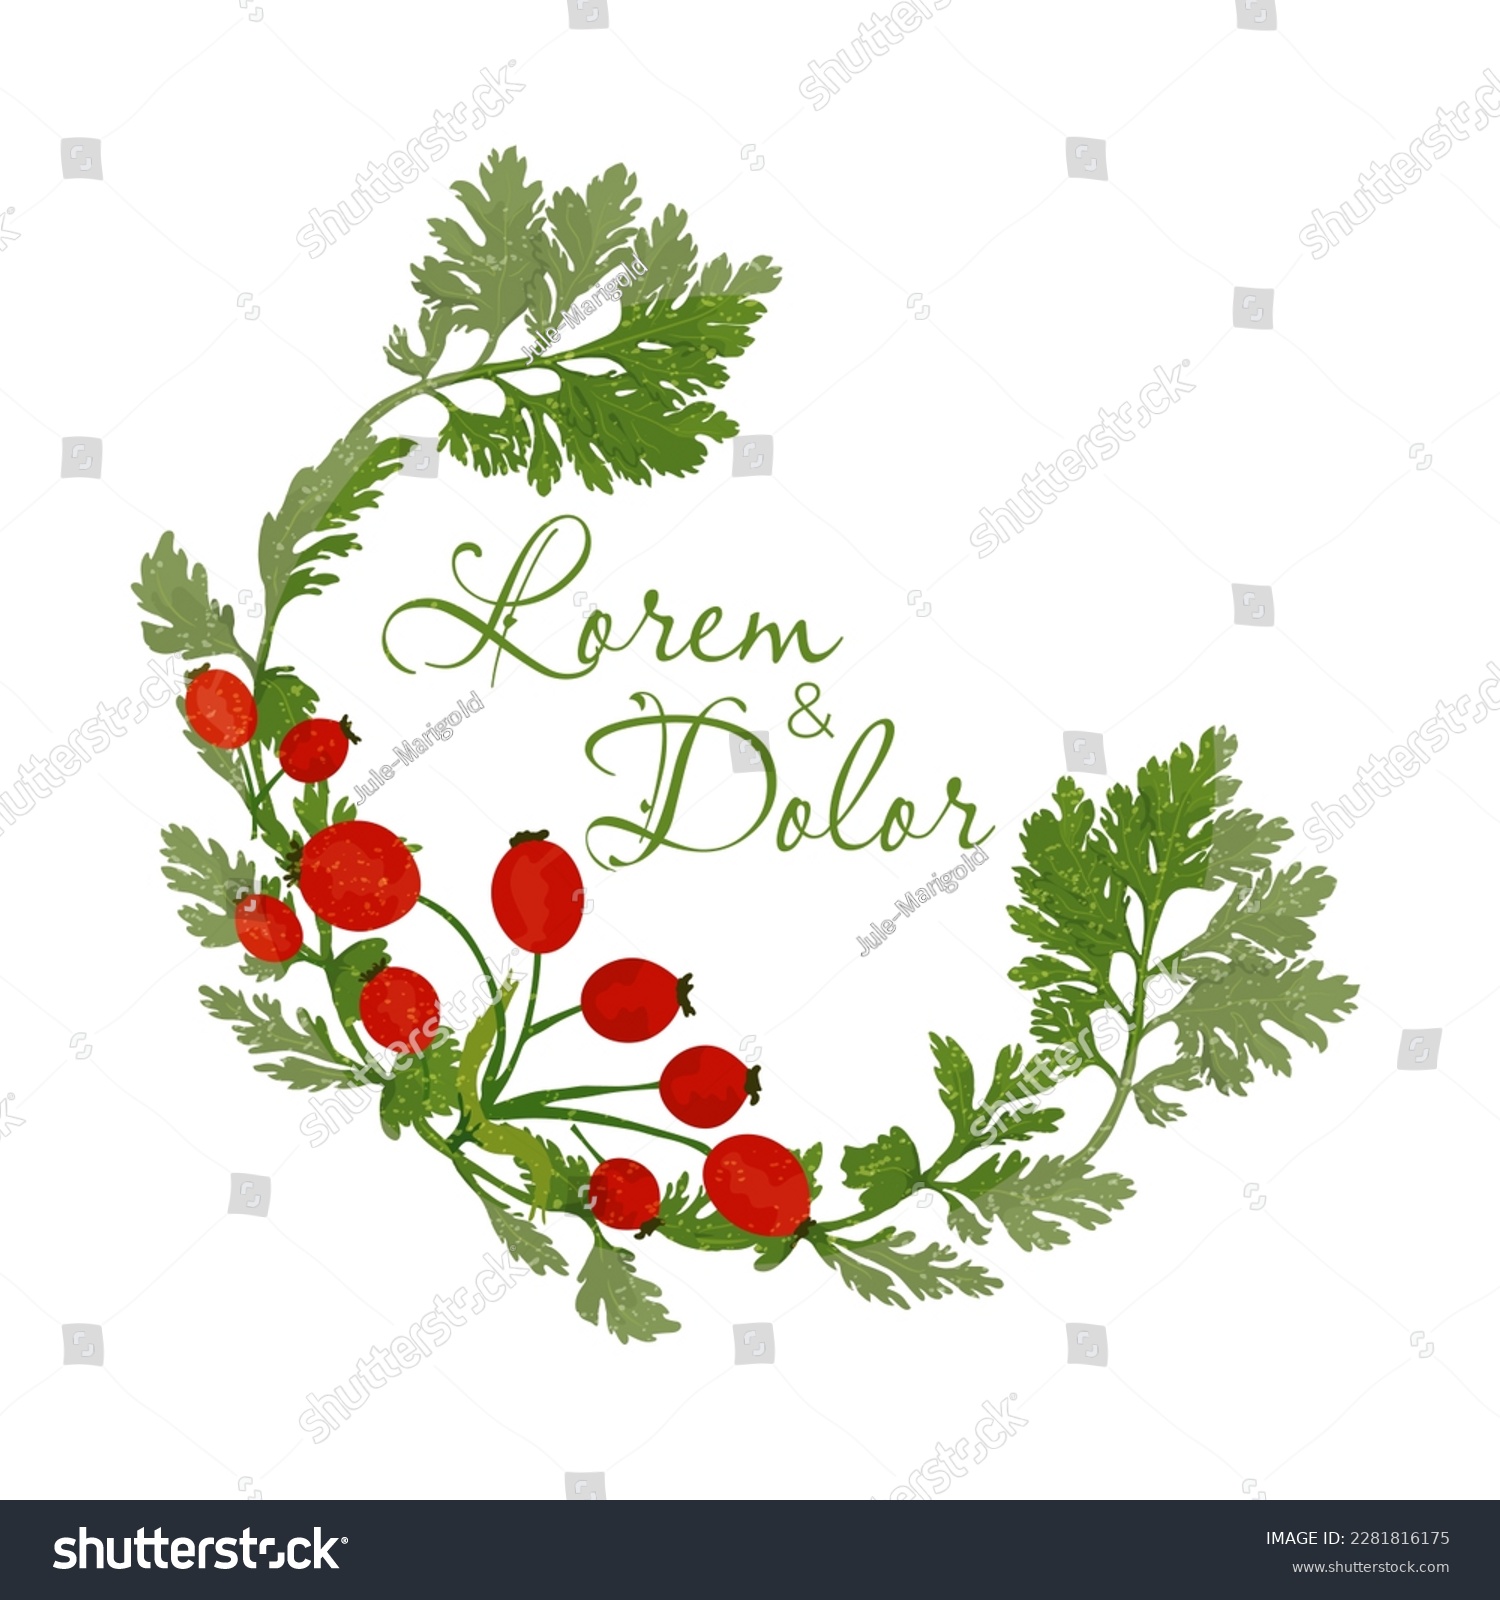 SVG of Cheerful half-wreath with colorful daisy leaves and dog rose fruits. The composition is covered with a snow-like texture. svg